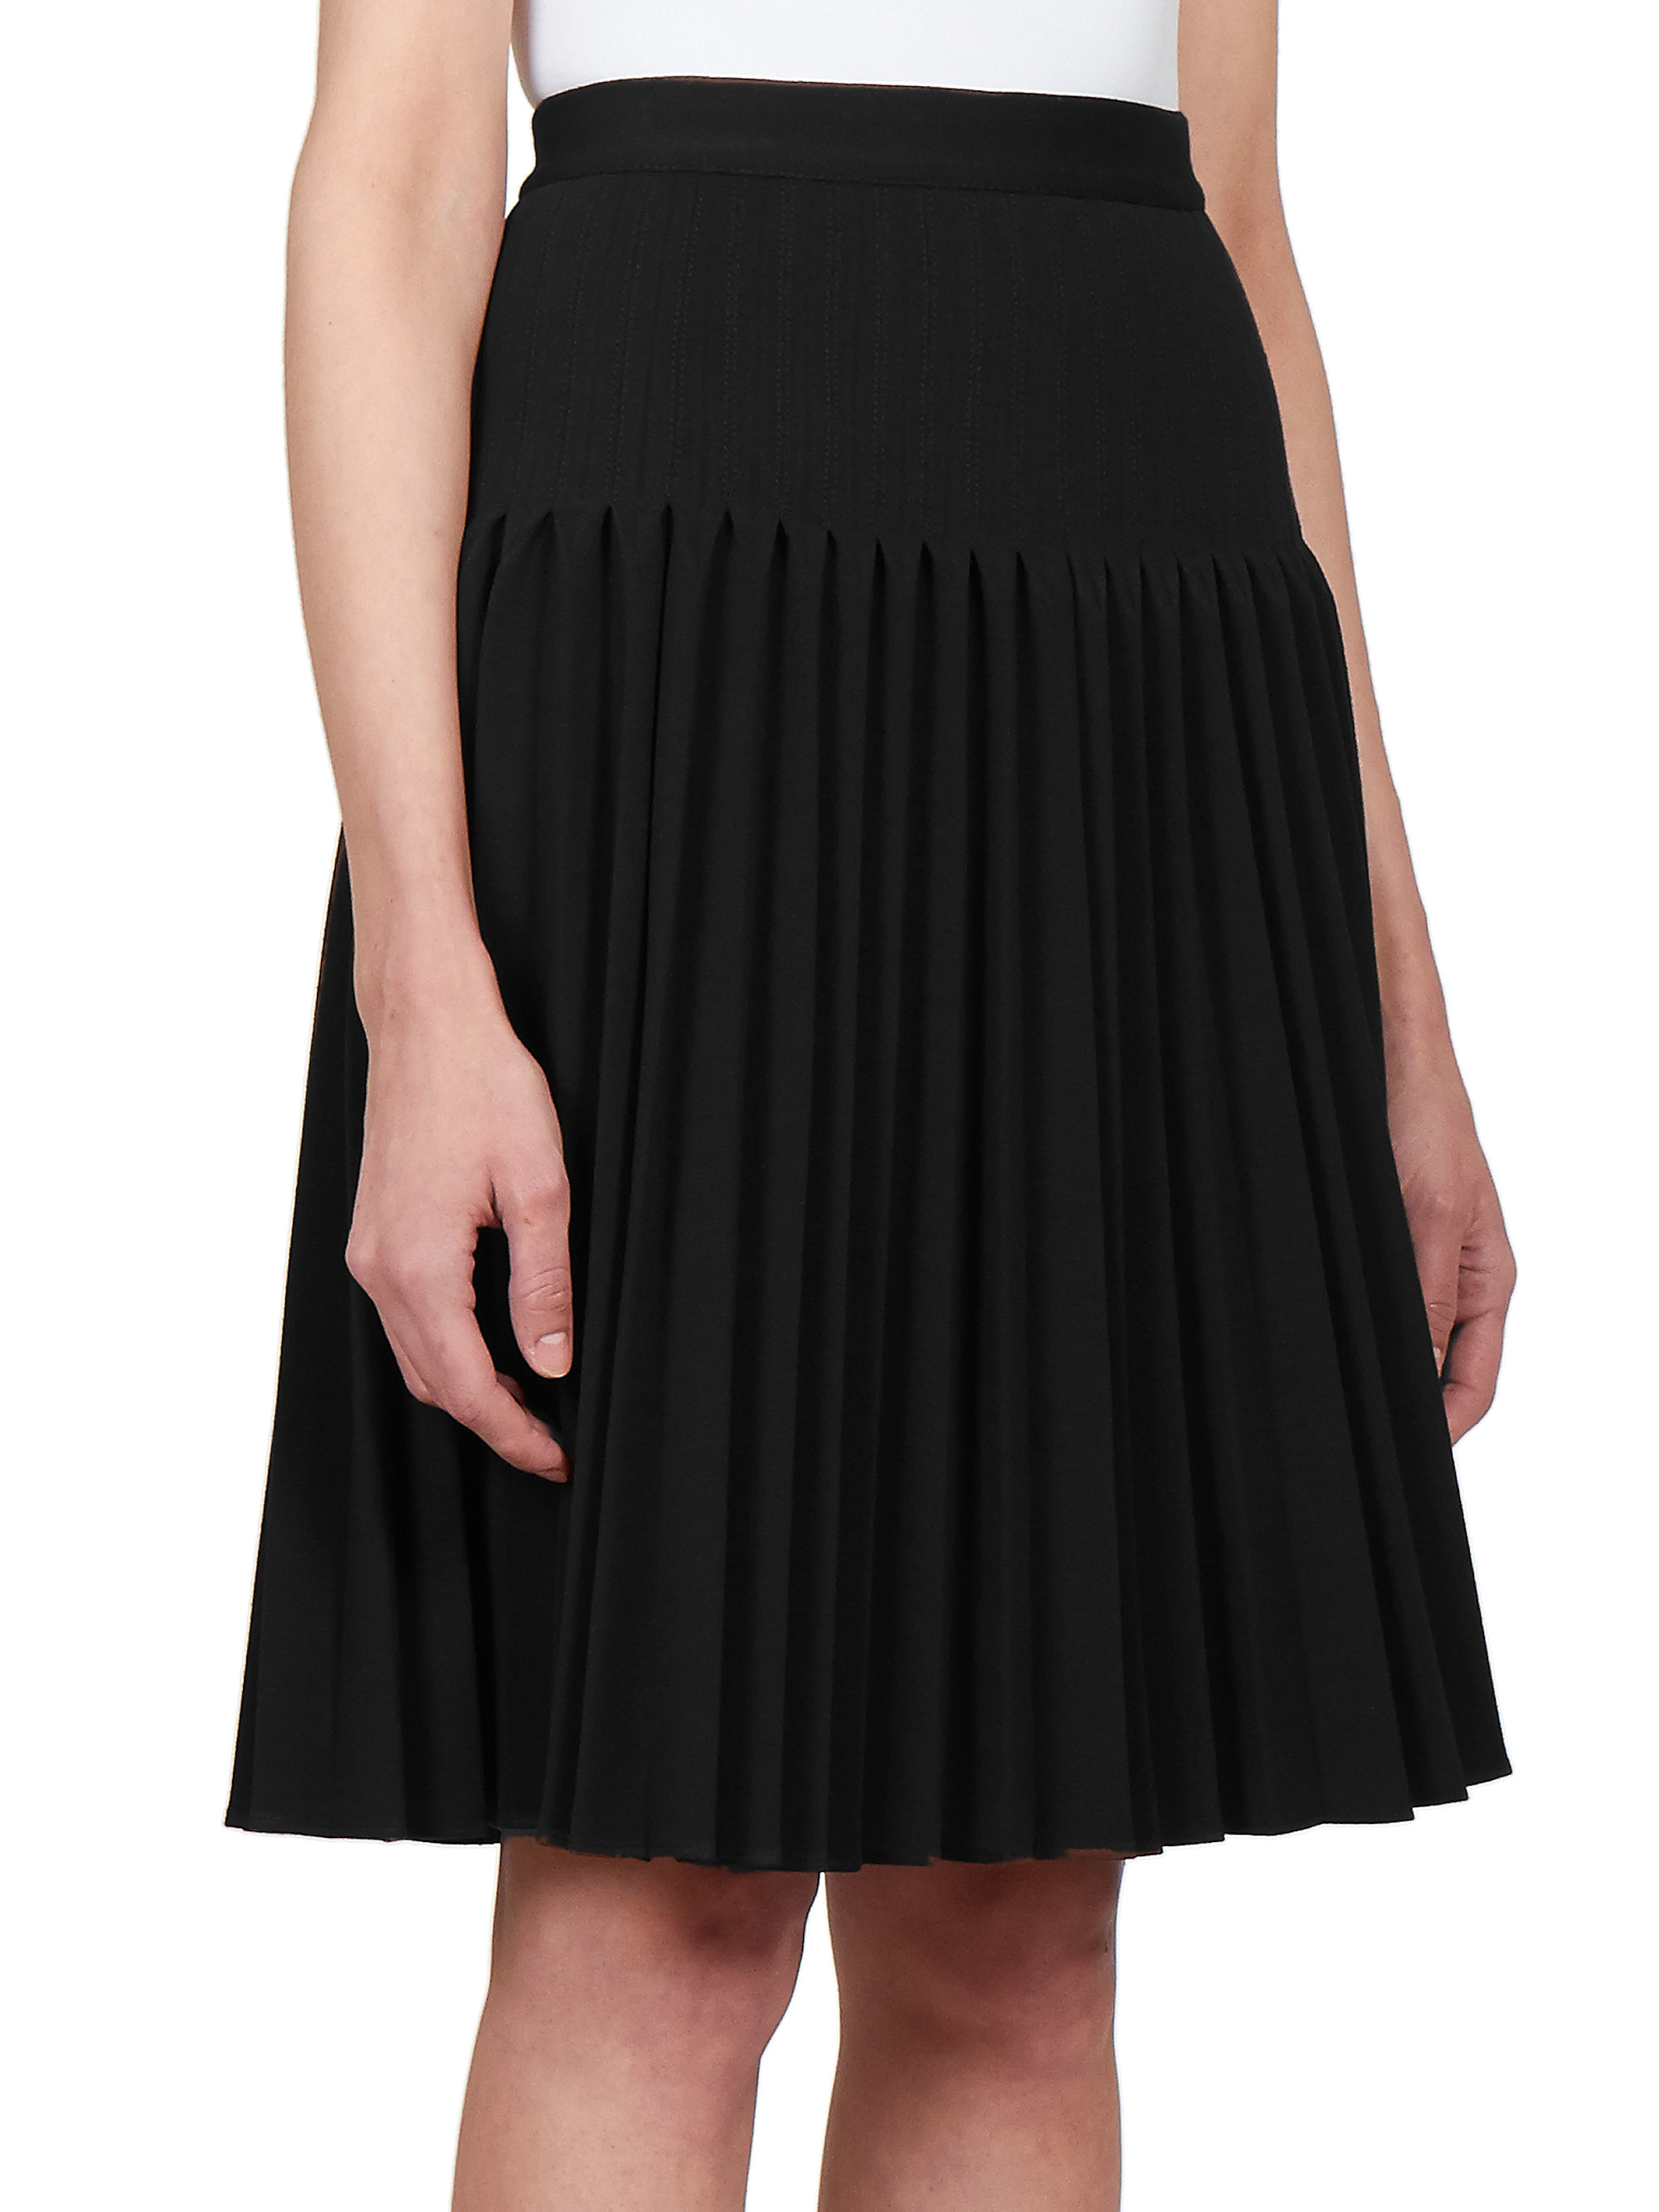 Lyst - Givenchy Pleated Milano Knit Skirt in Black